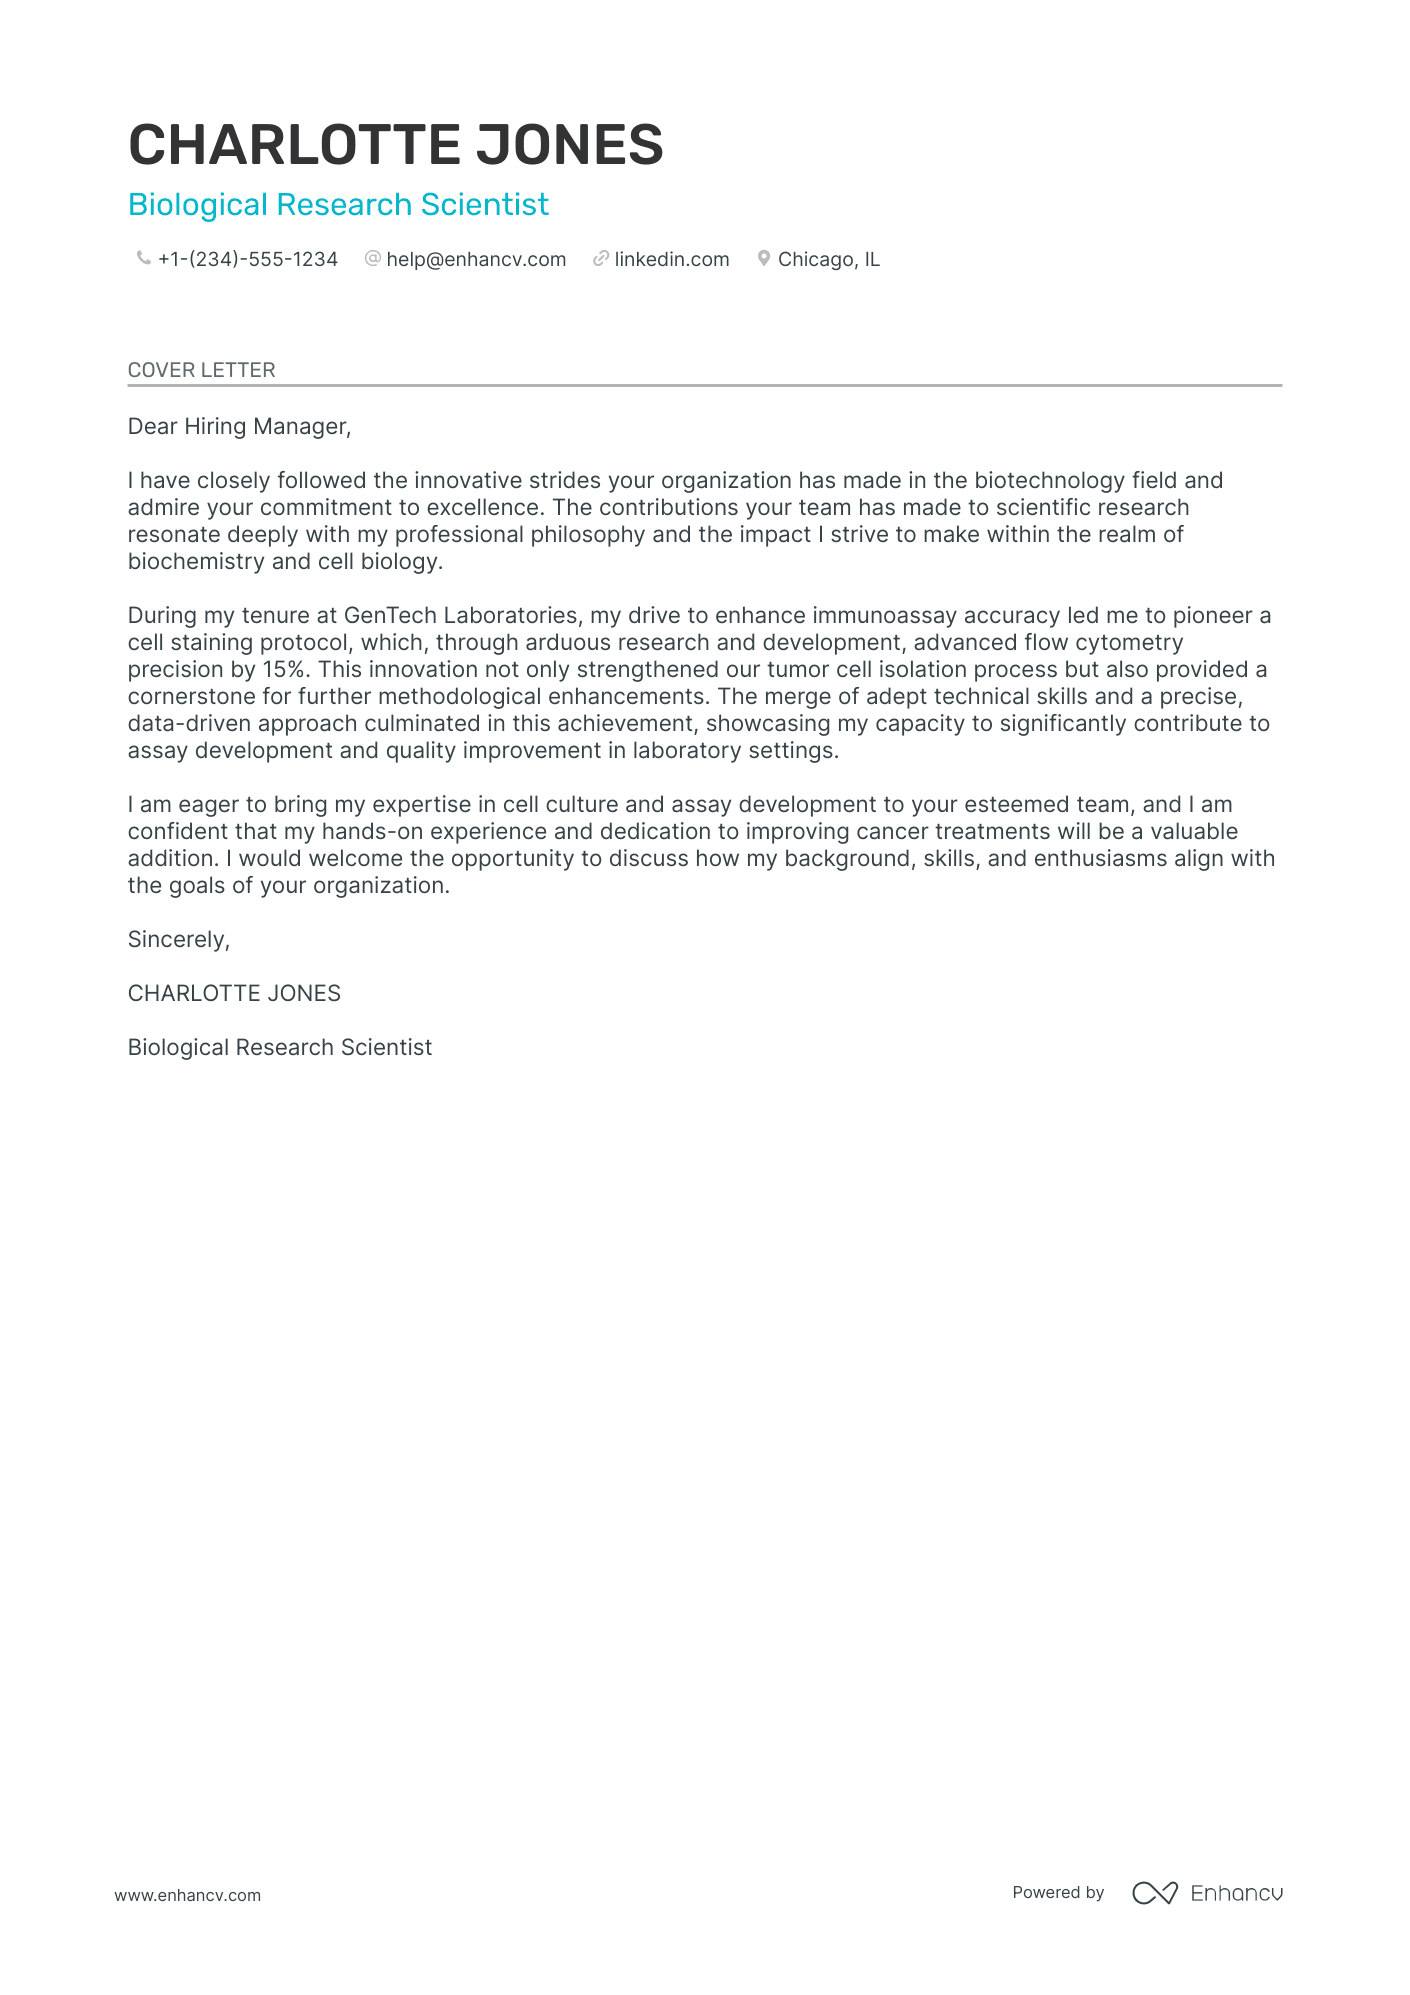 Scientist cover letter